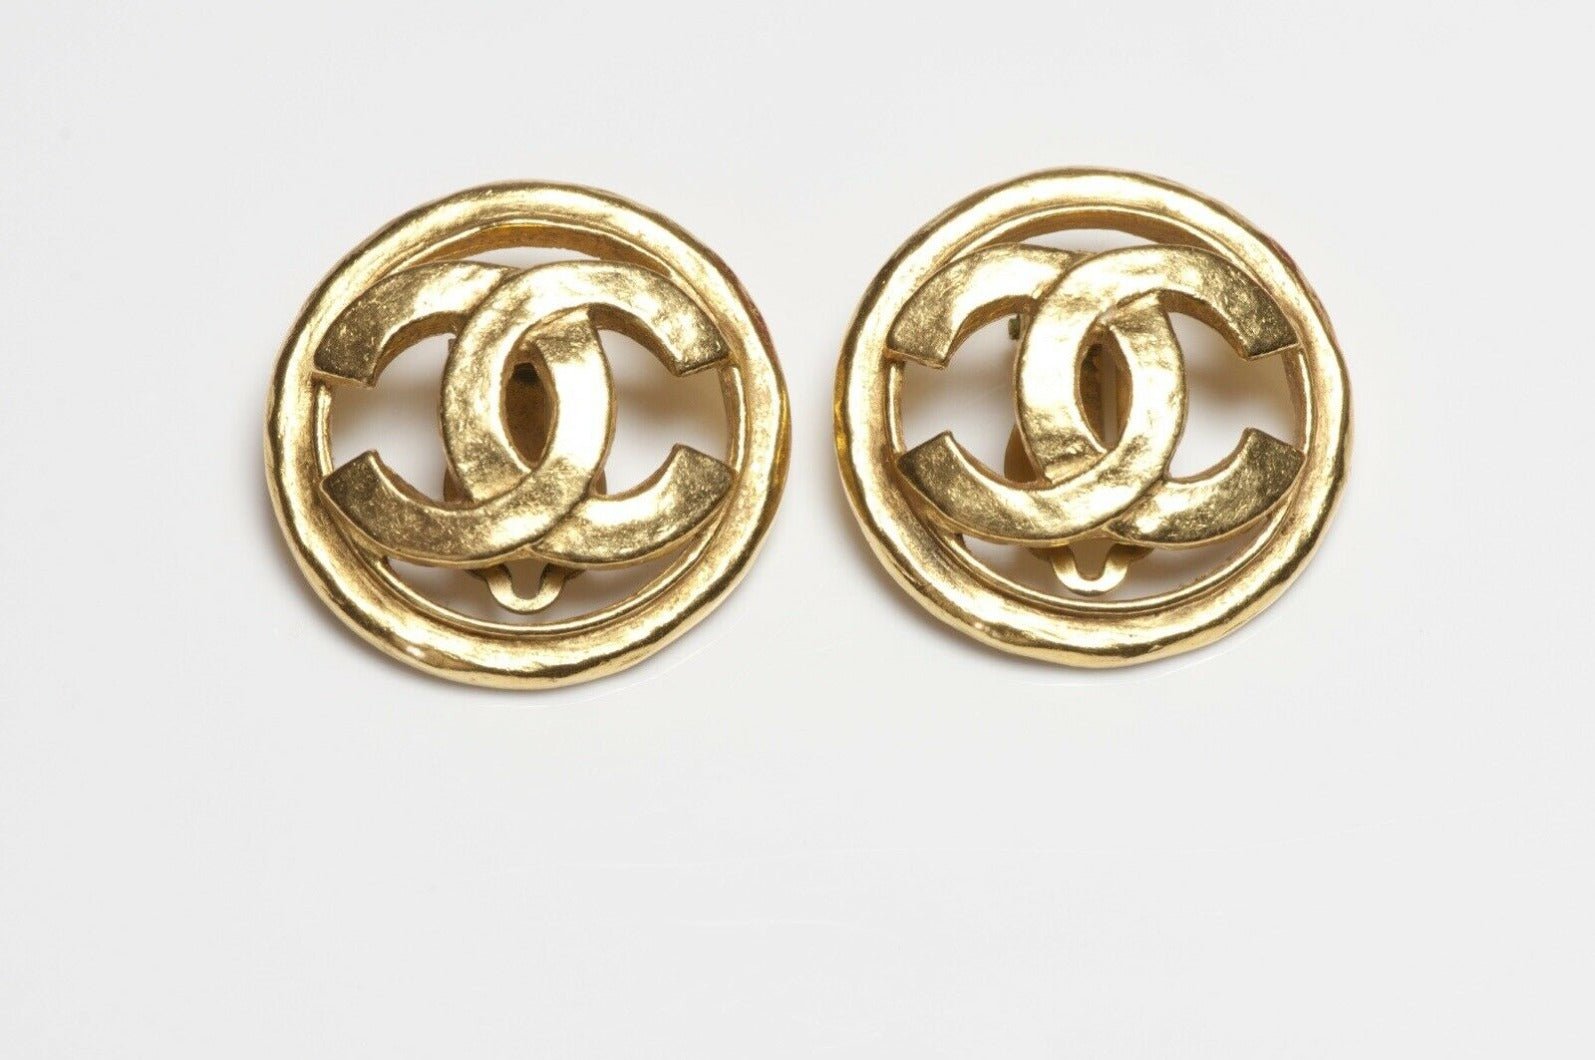 CHANEL Paris Spring 1994 Gold Plated CC Round Earrings